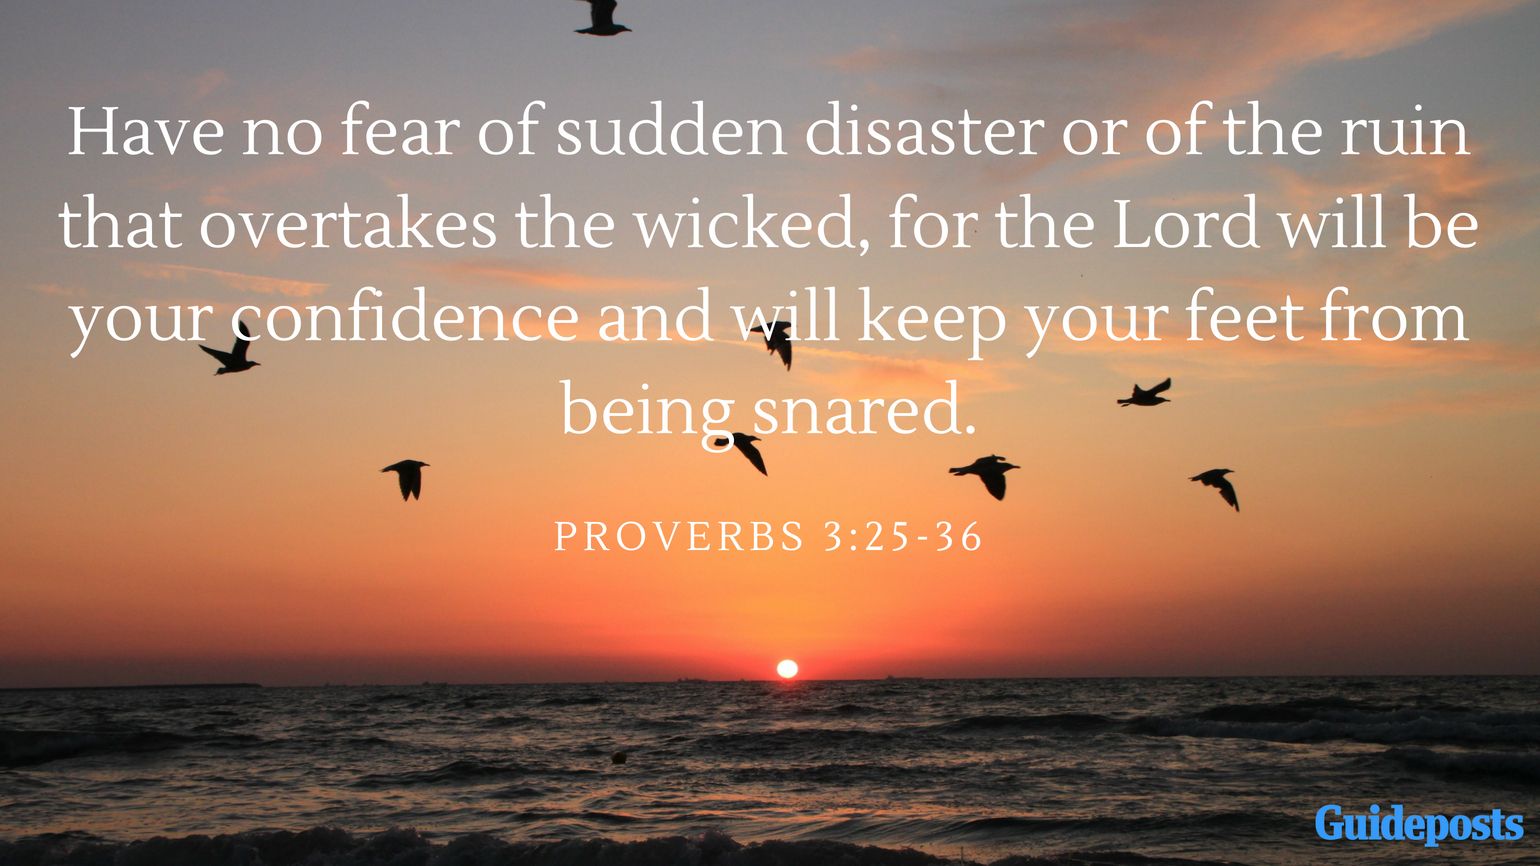 Have no fear of sudden disaster or of the ruin that overtakes the wicked, for the Lord will be your confidence and will keep your feet from being snared. Proverbs 3:25-36